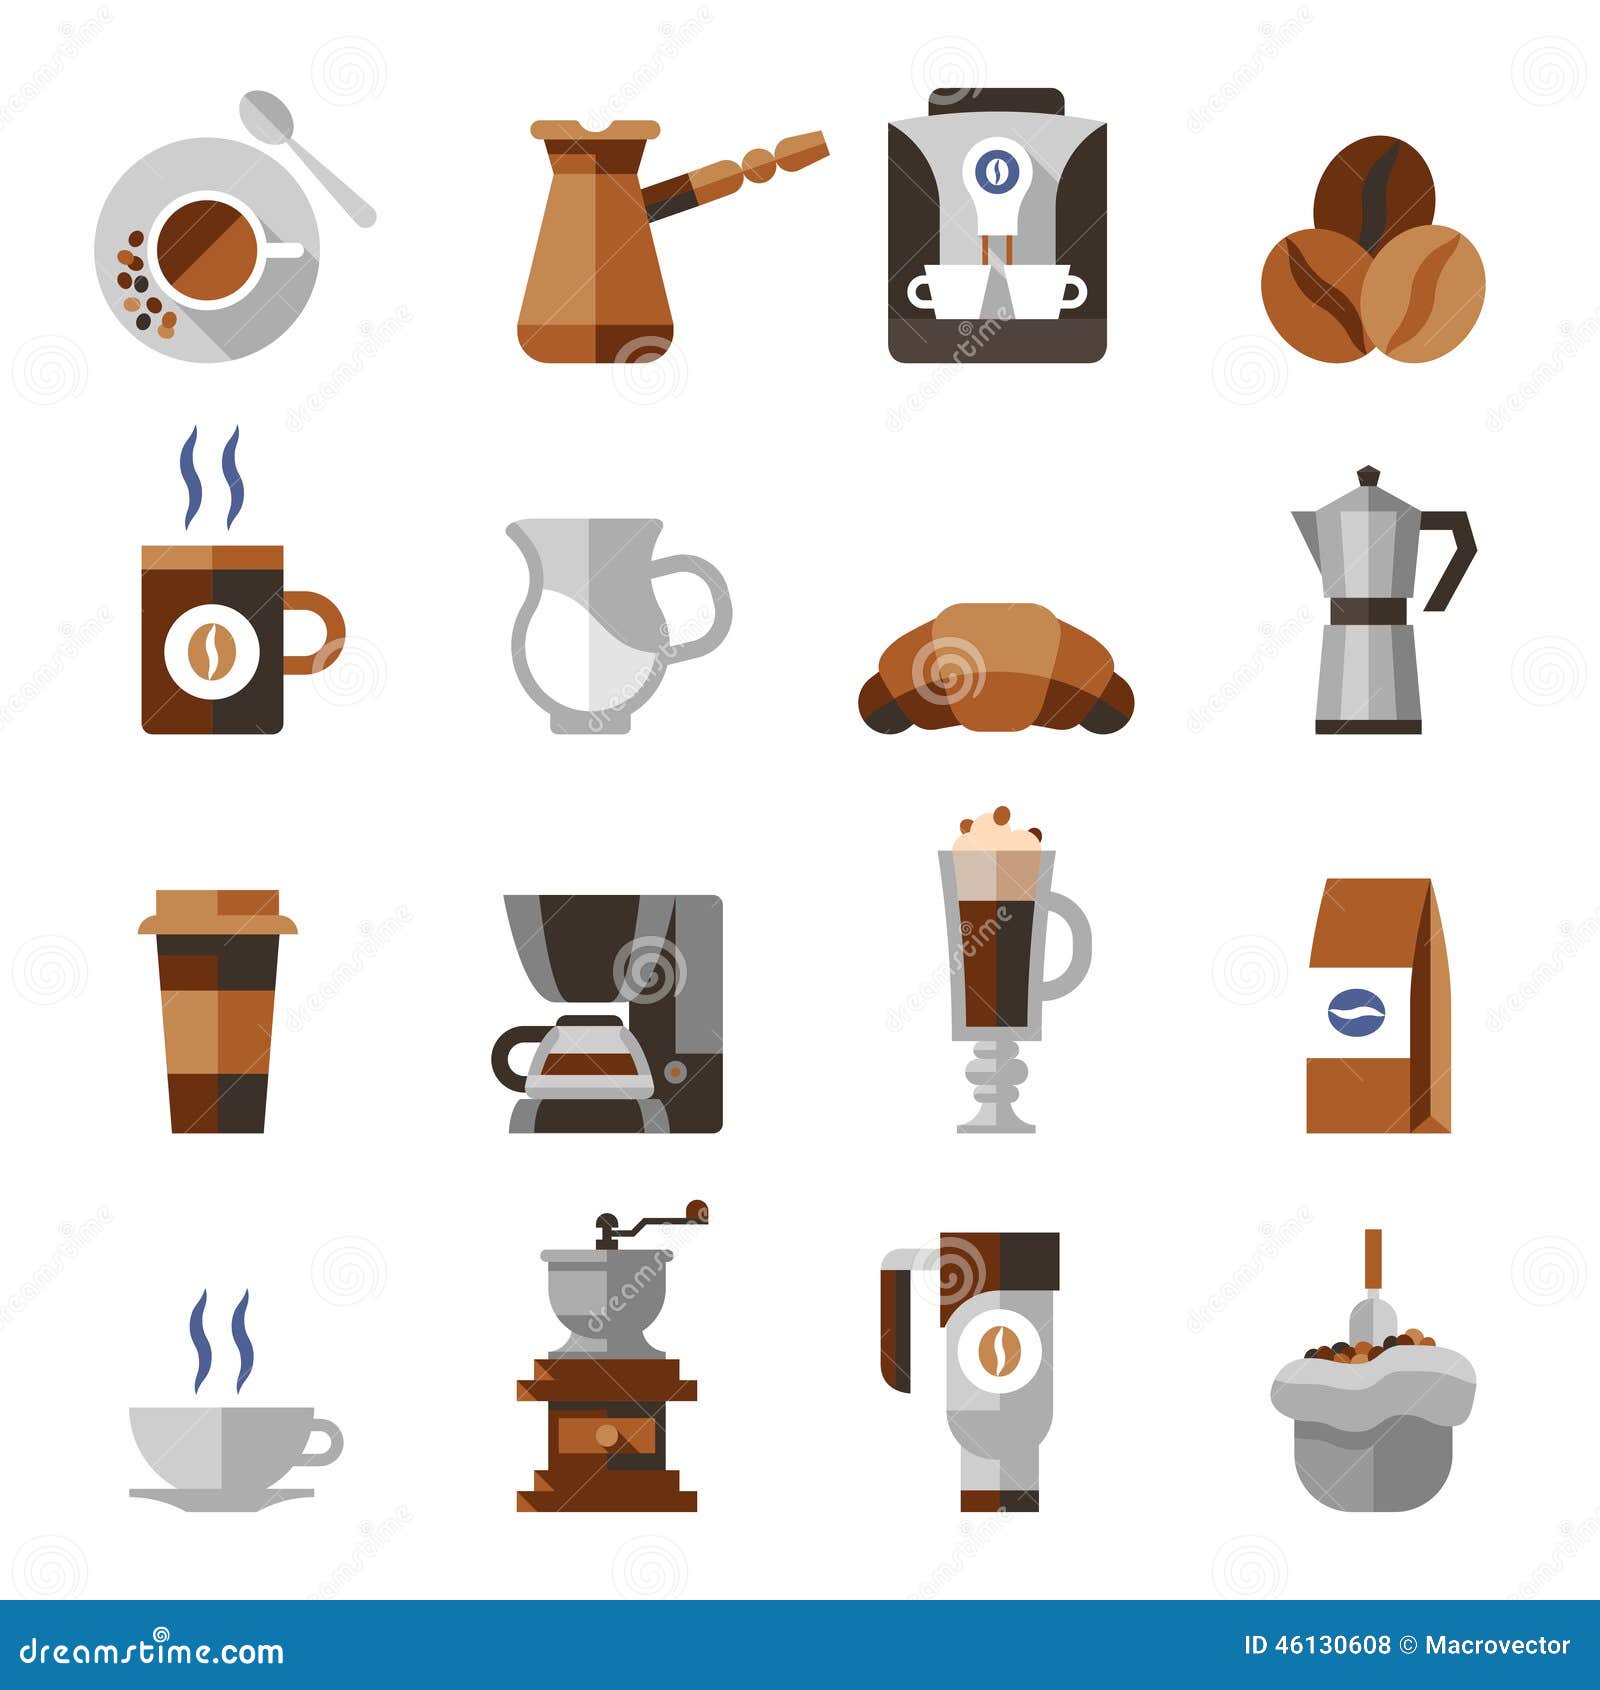 https://thumbs.dreamstime.com/z/coffee-icons-flat-set-french-press-machine-pouch-grinder-isolated-vector-illustration-46130608.jpg